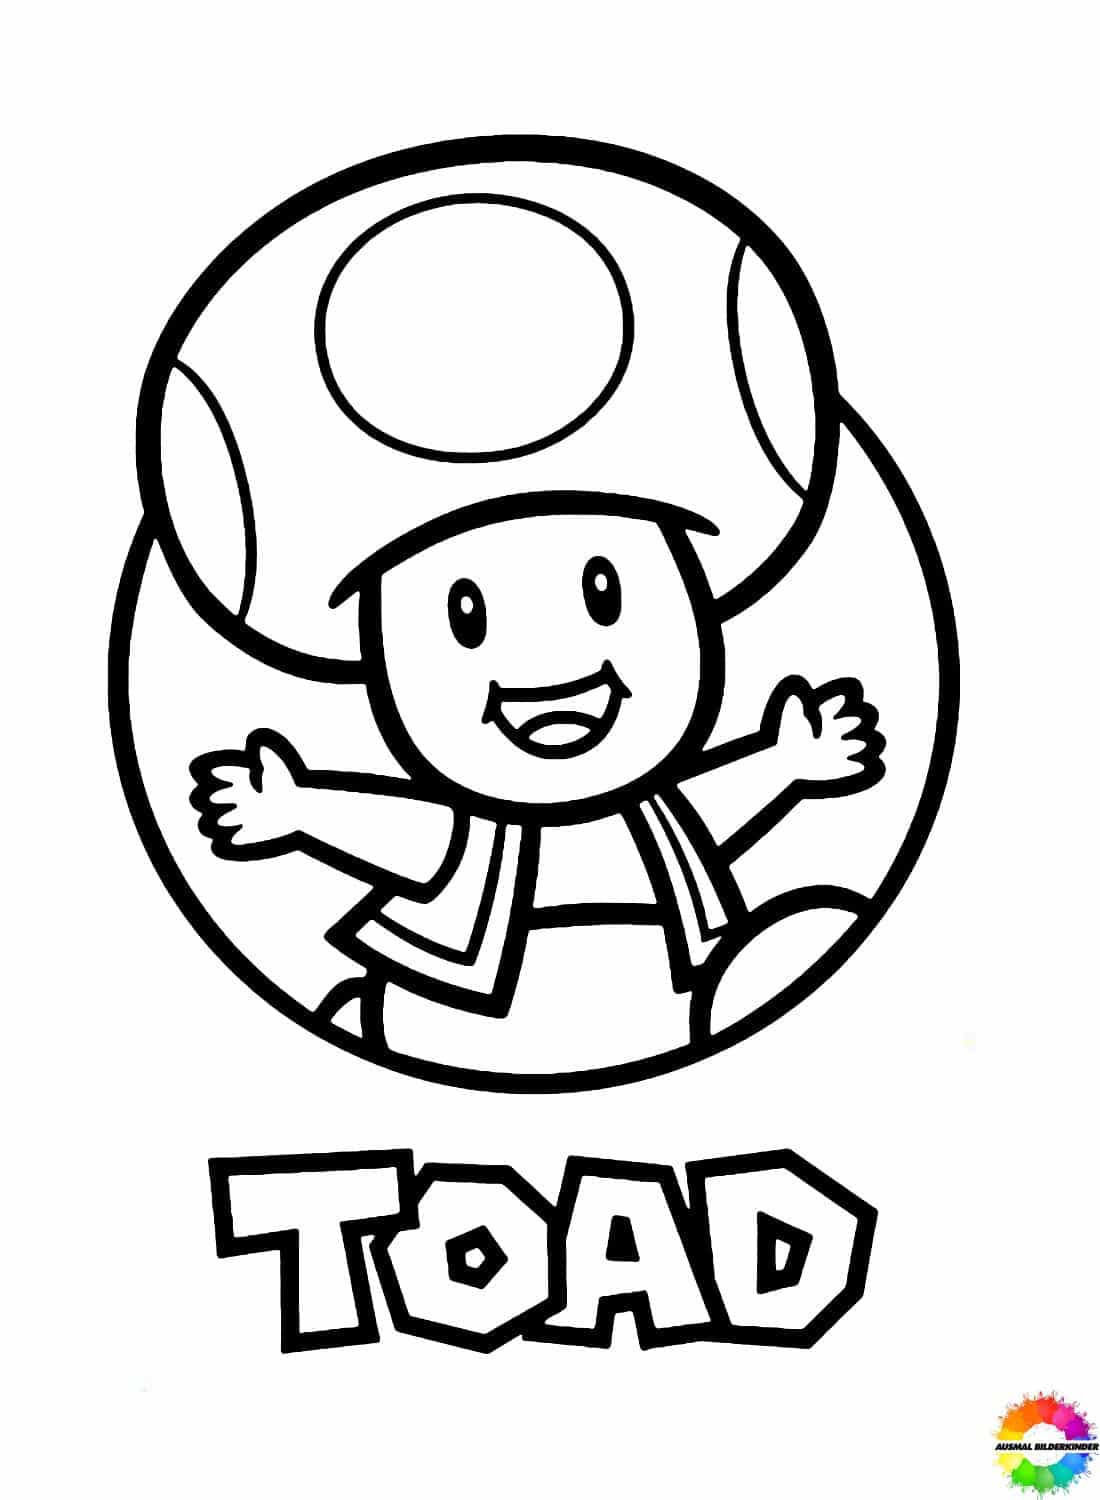 Toad 9